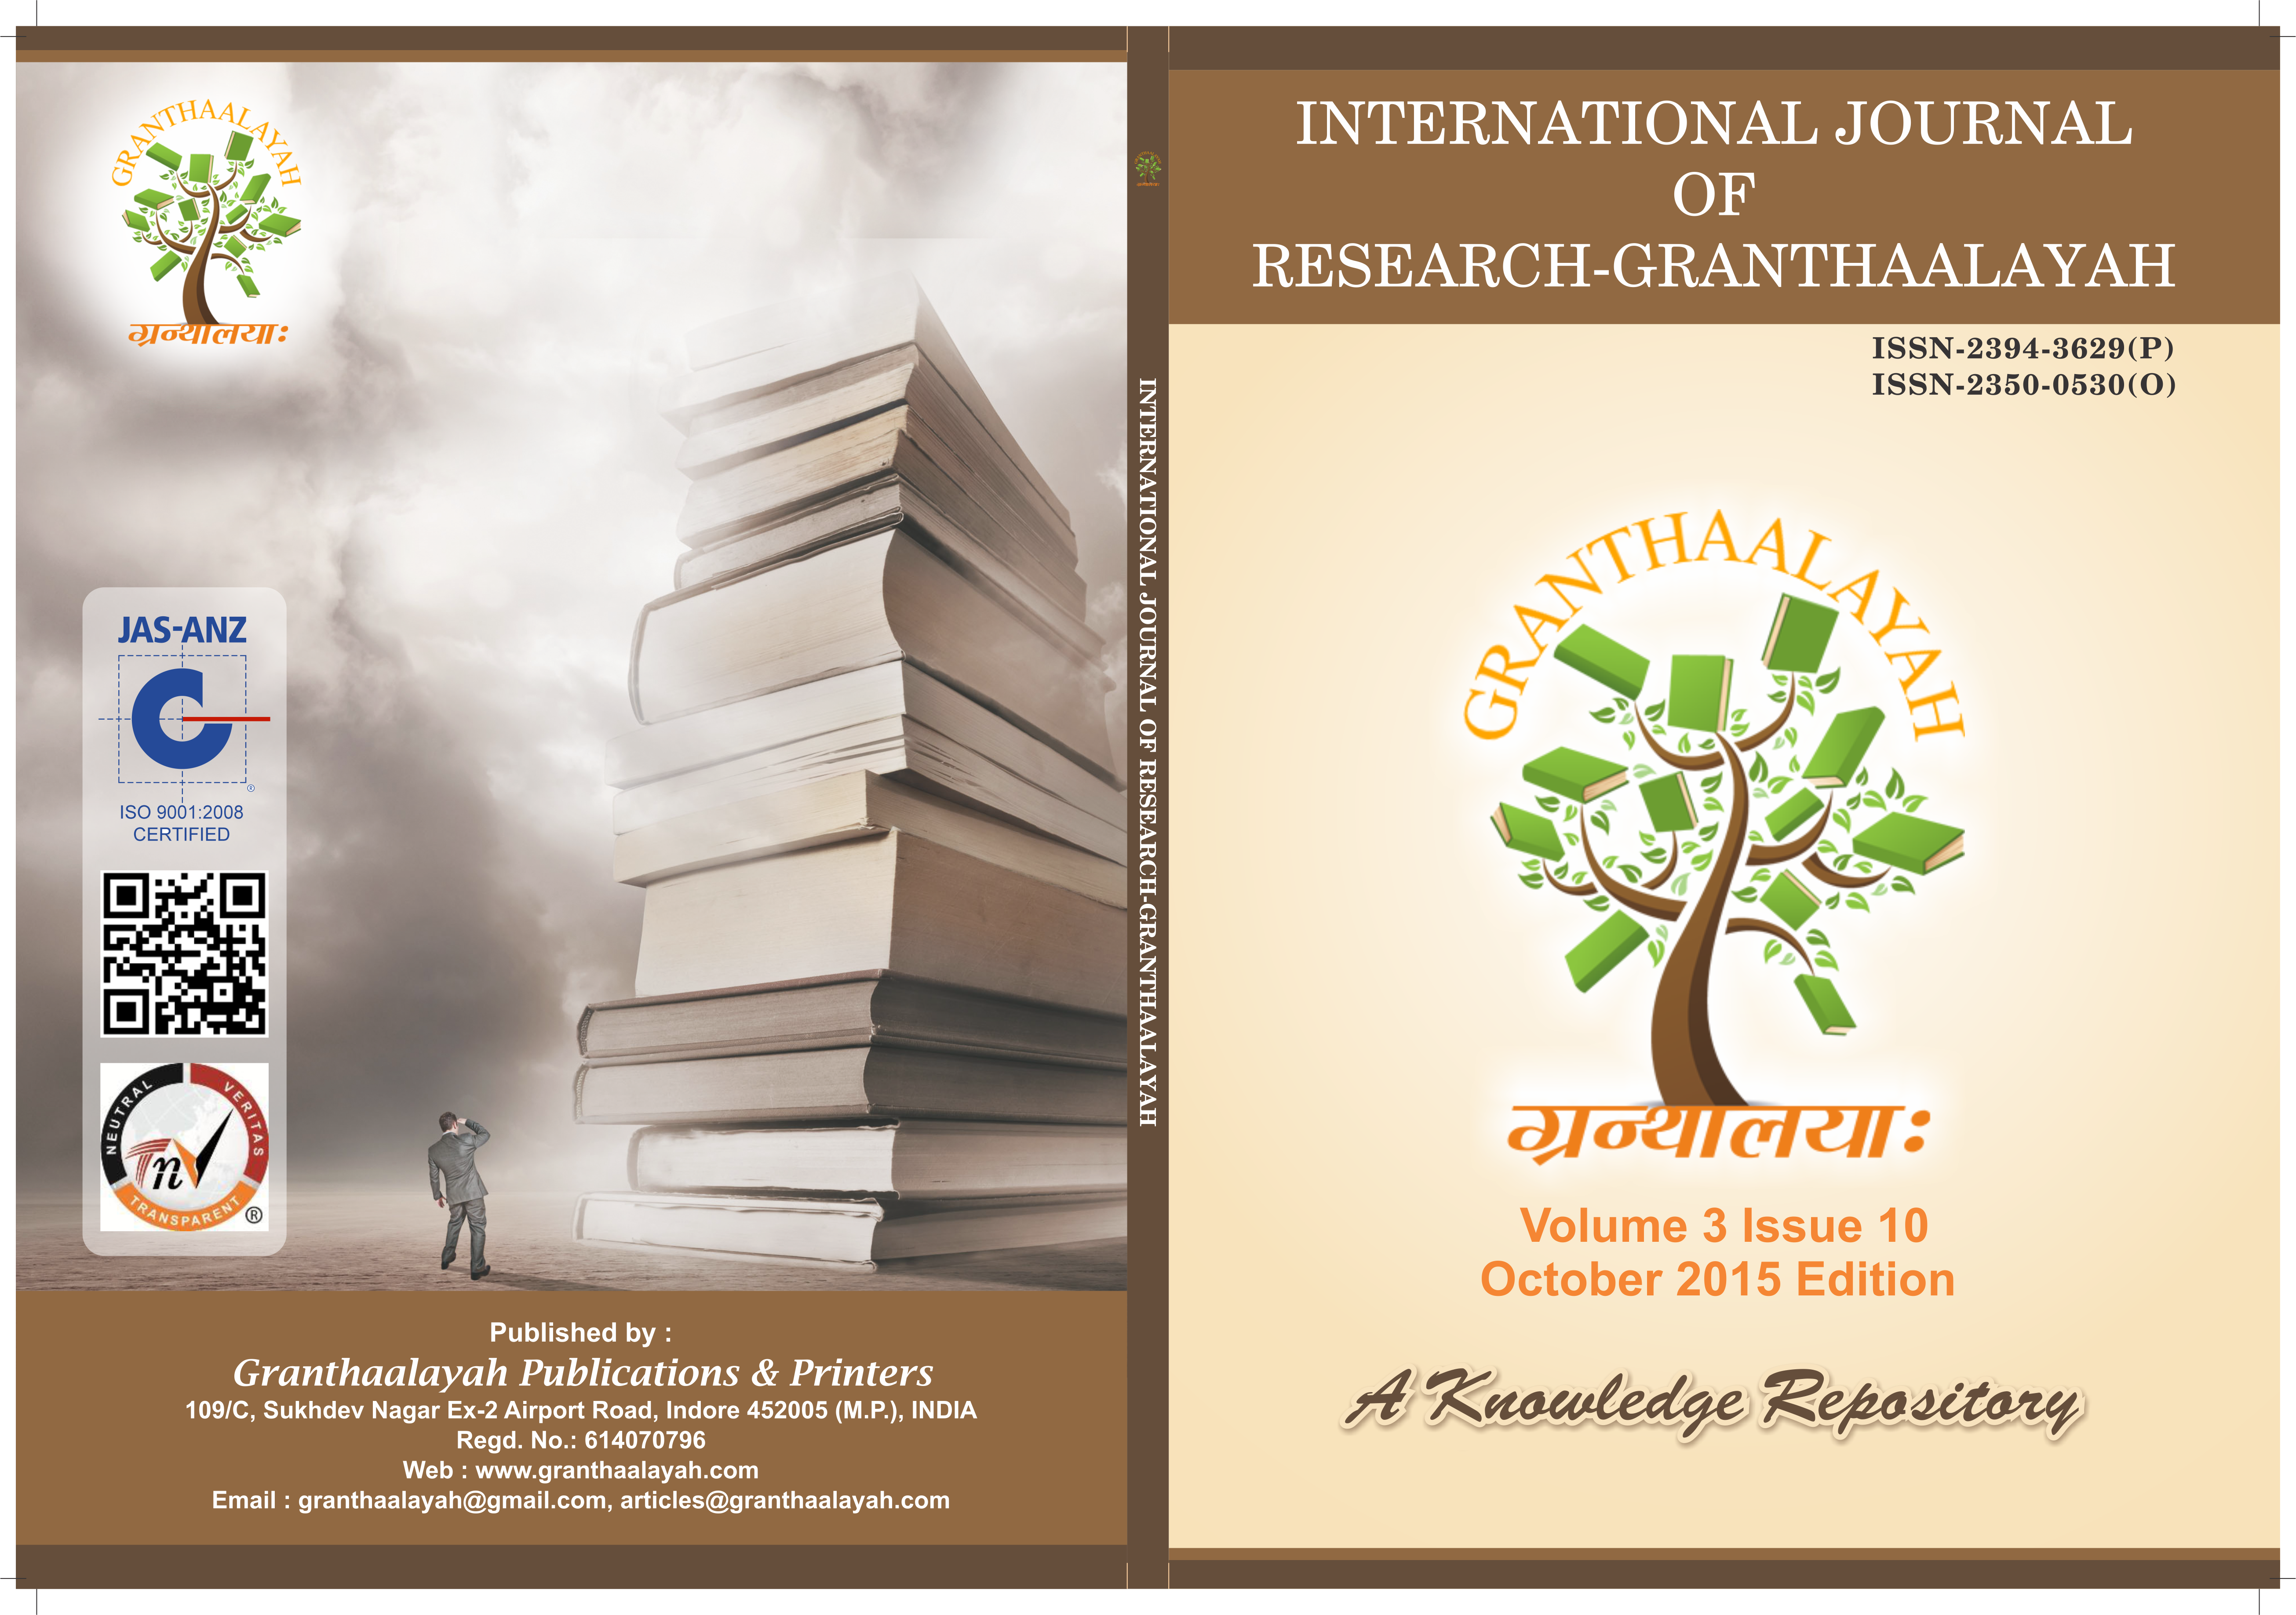 					View Vol. 3 No. 10 (2015): Volume 3 Issue 10 - October, 2015
				